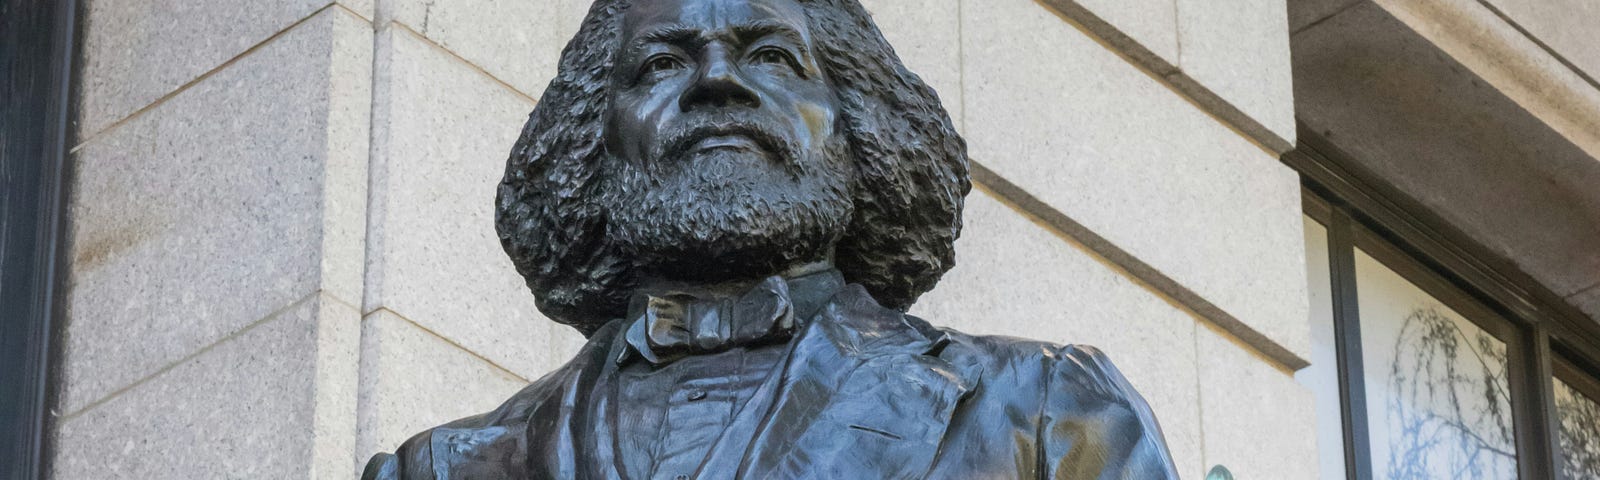 A photo of the Frederick Douglass Statue at the New York Historical Society, standing tall, proud and holding a book in his left hand close to his body.